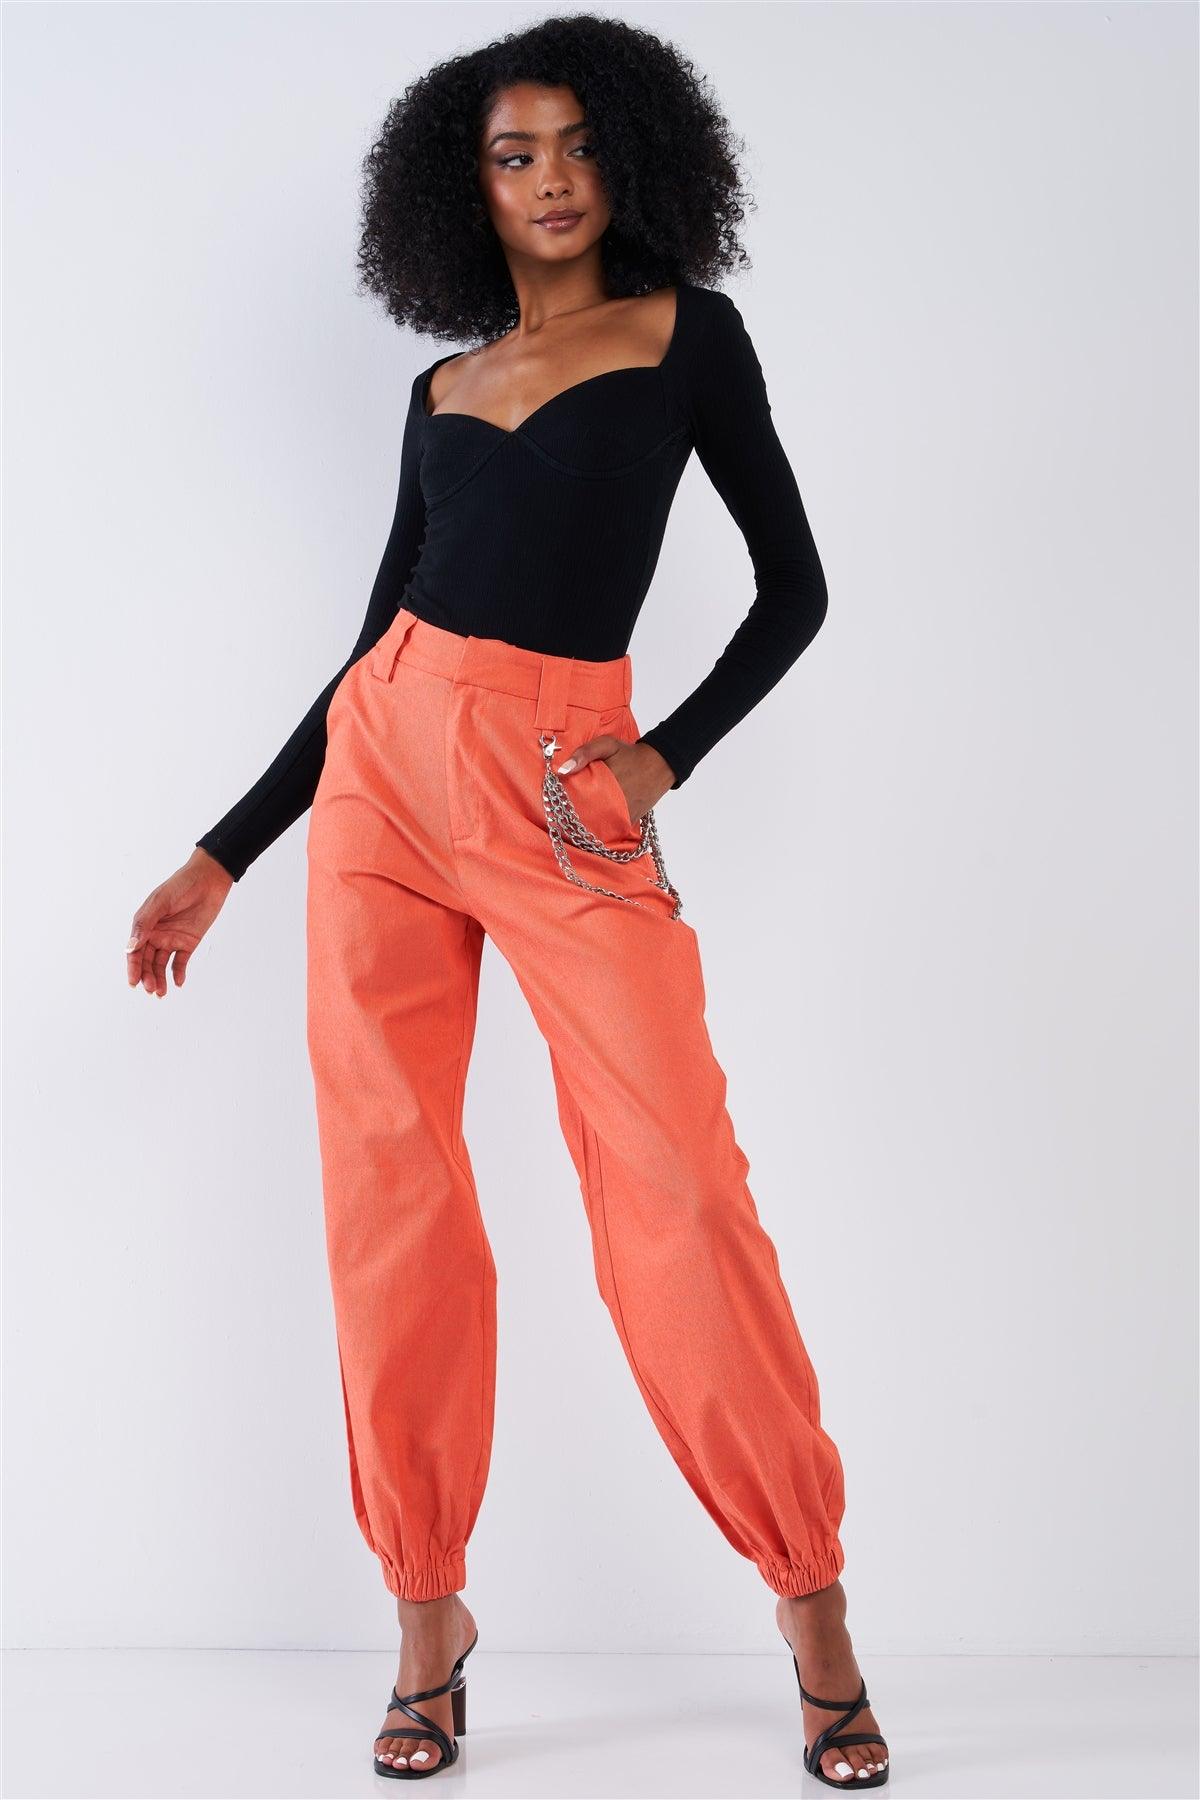 Solid Orange Parachute Cargo Jogger Pants With Chain Hardware Detail